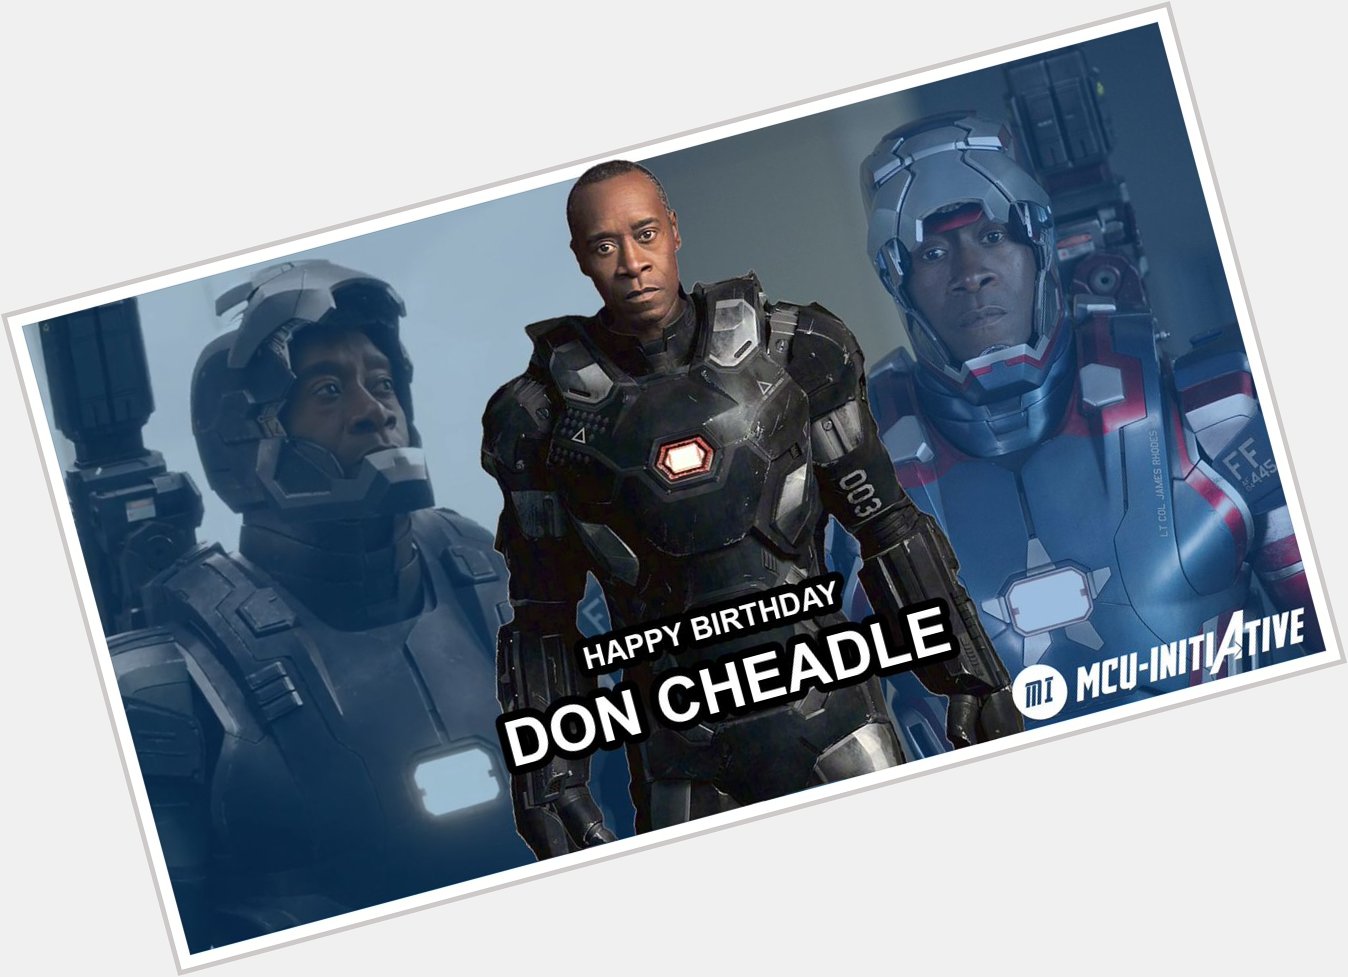 Happy birthday to Don Cheadle from all at MCU-INITIATIVE.    